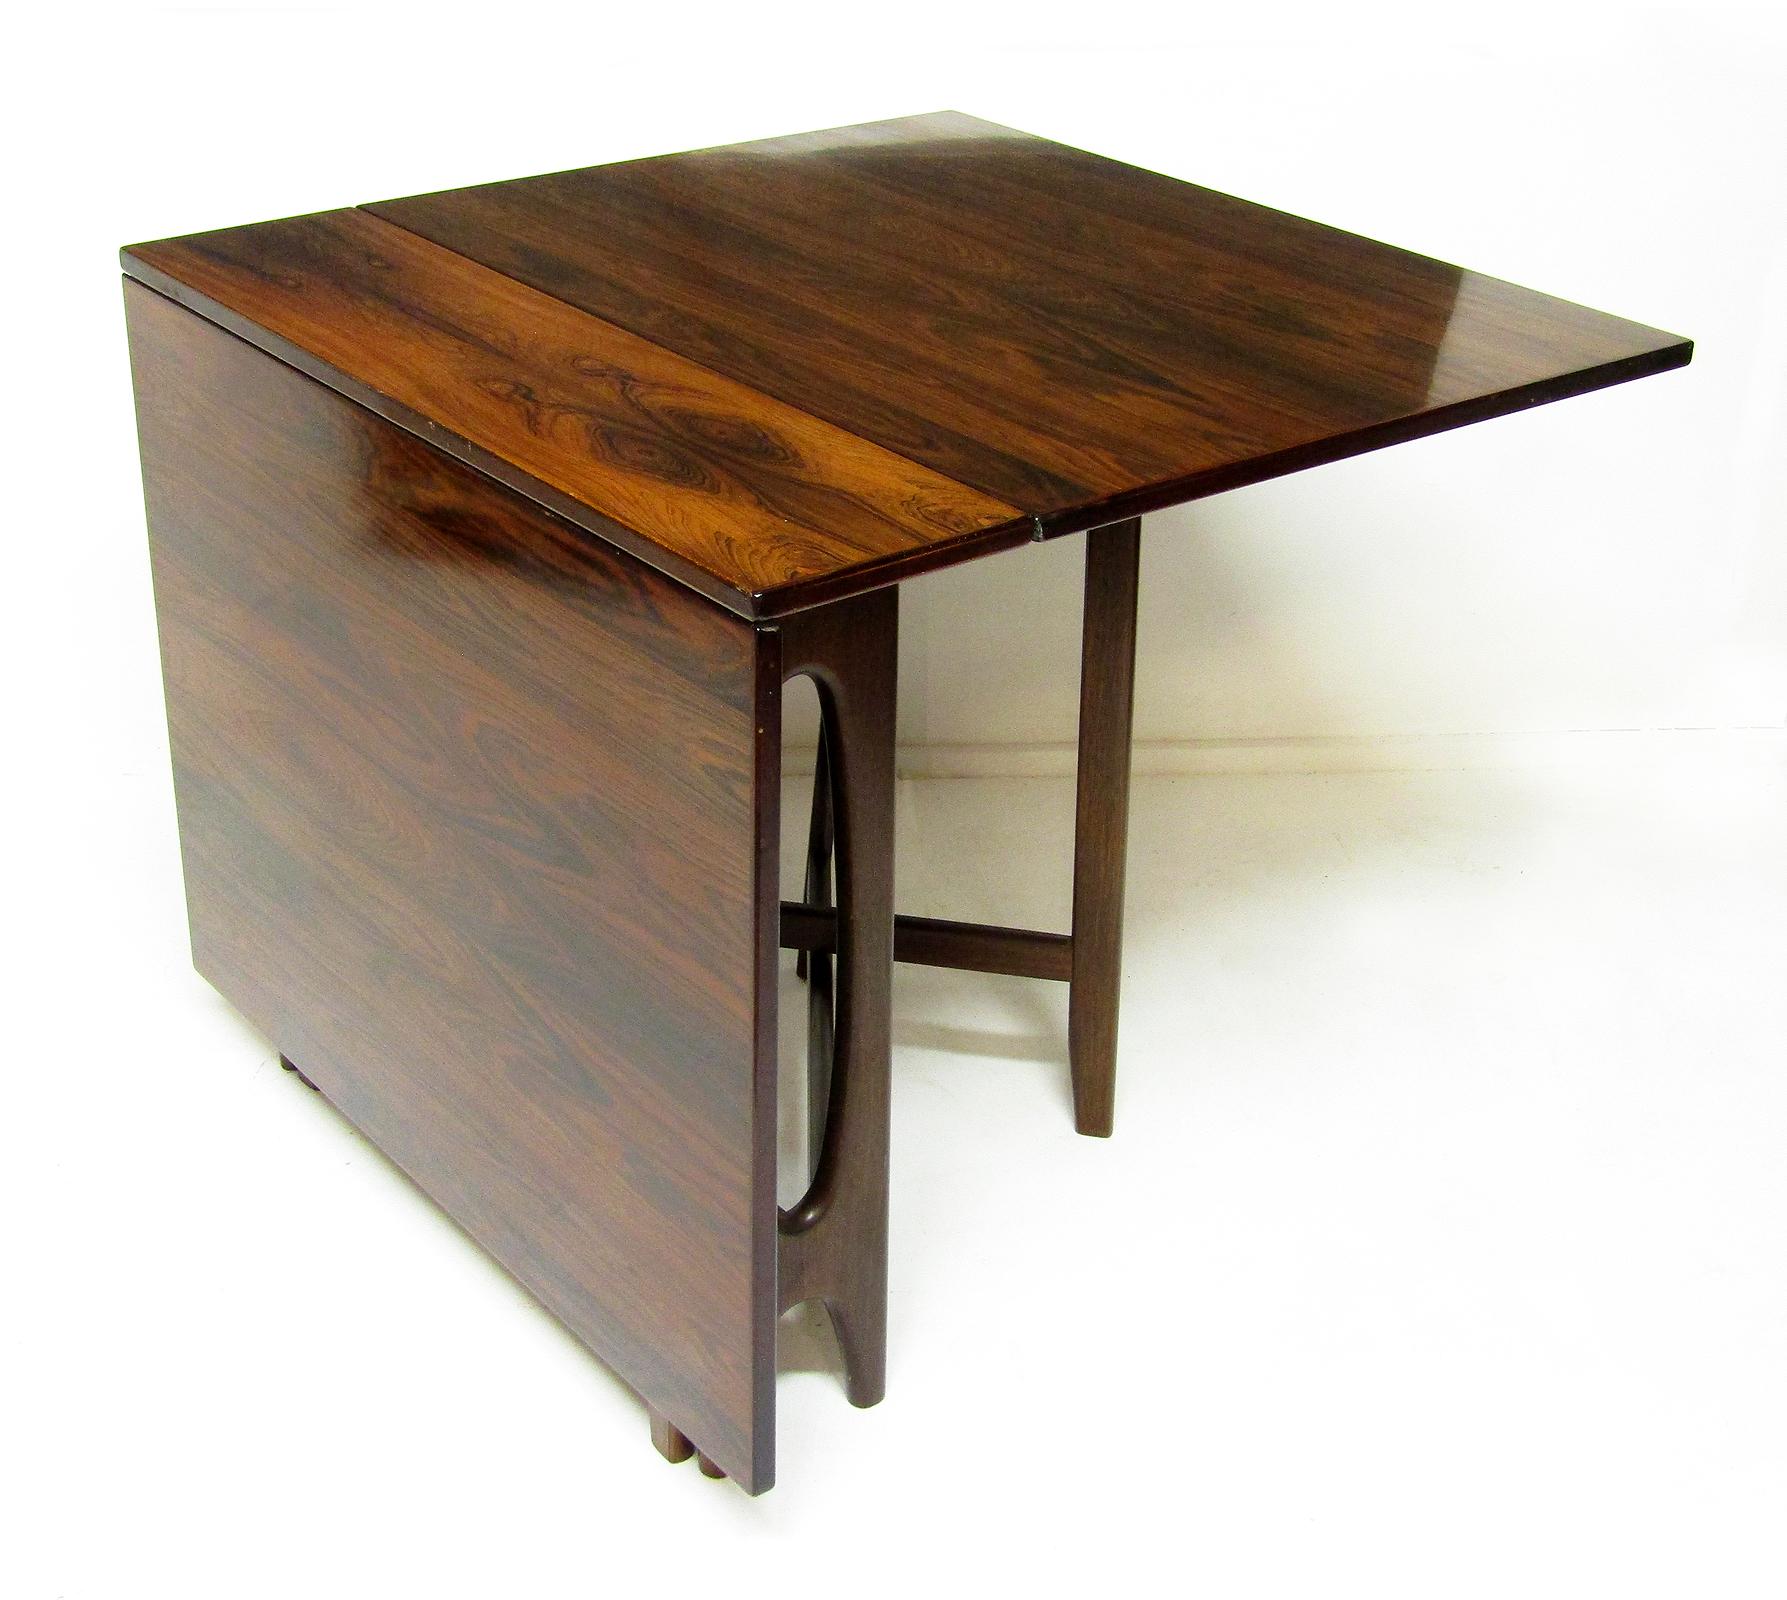 20th Century 1970s Scandinavian Drop-Leaf Rio Rosewood Extending Dining Table by Bendt Winge For Sale